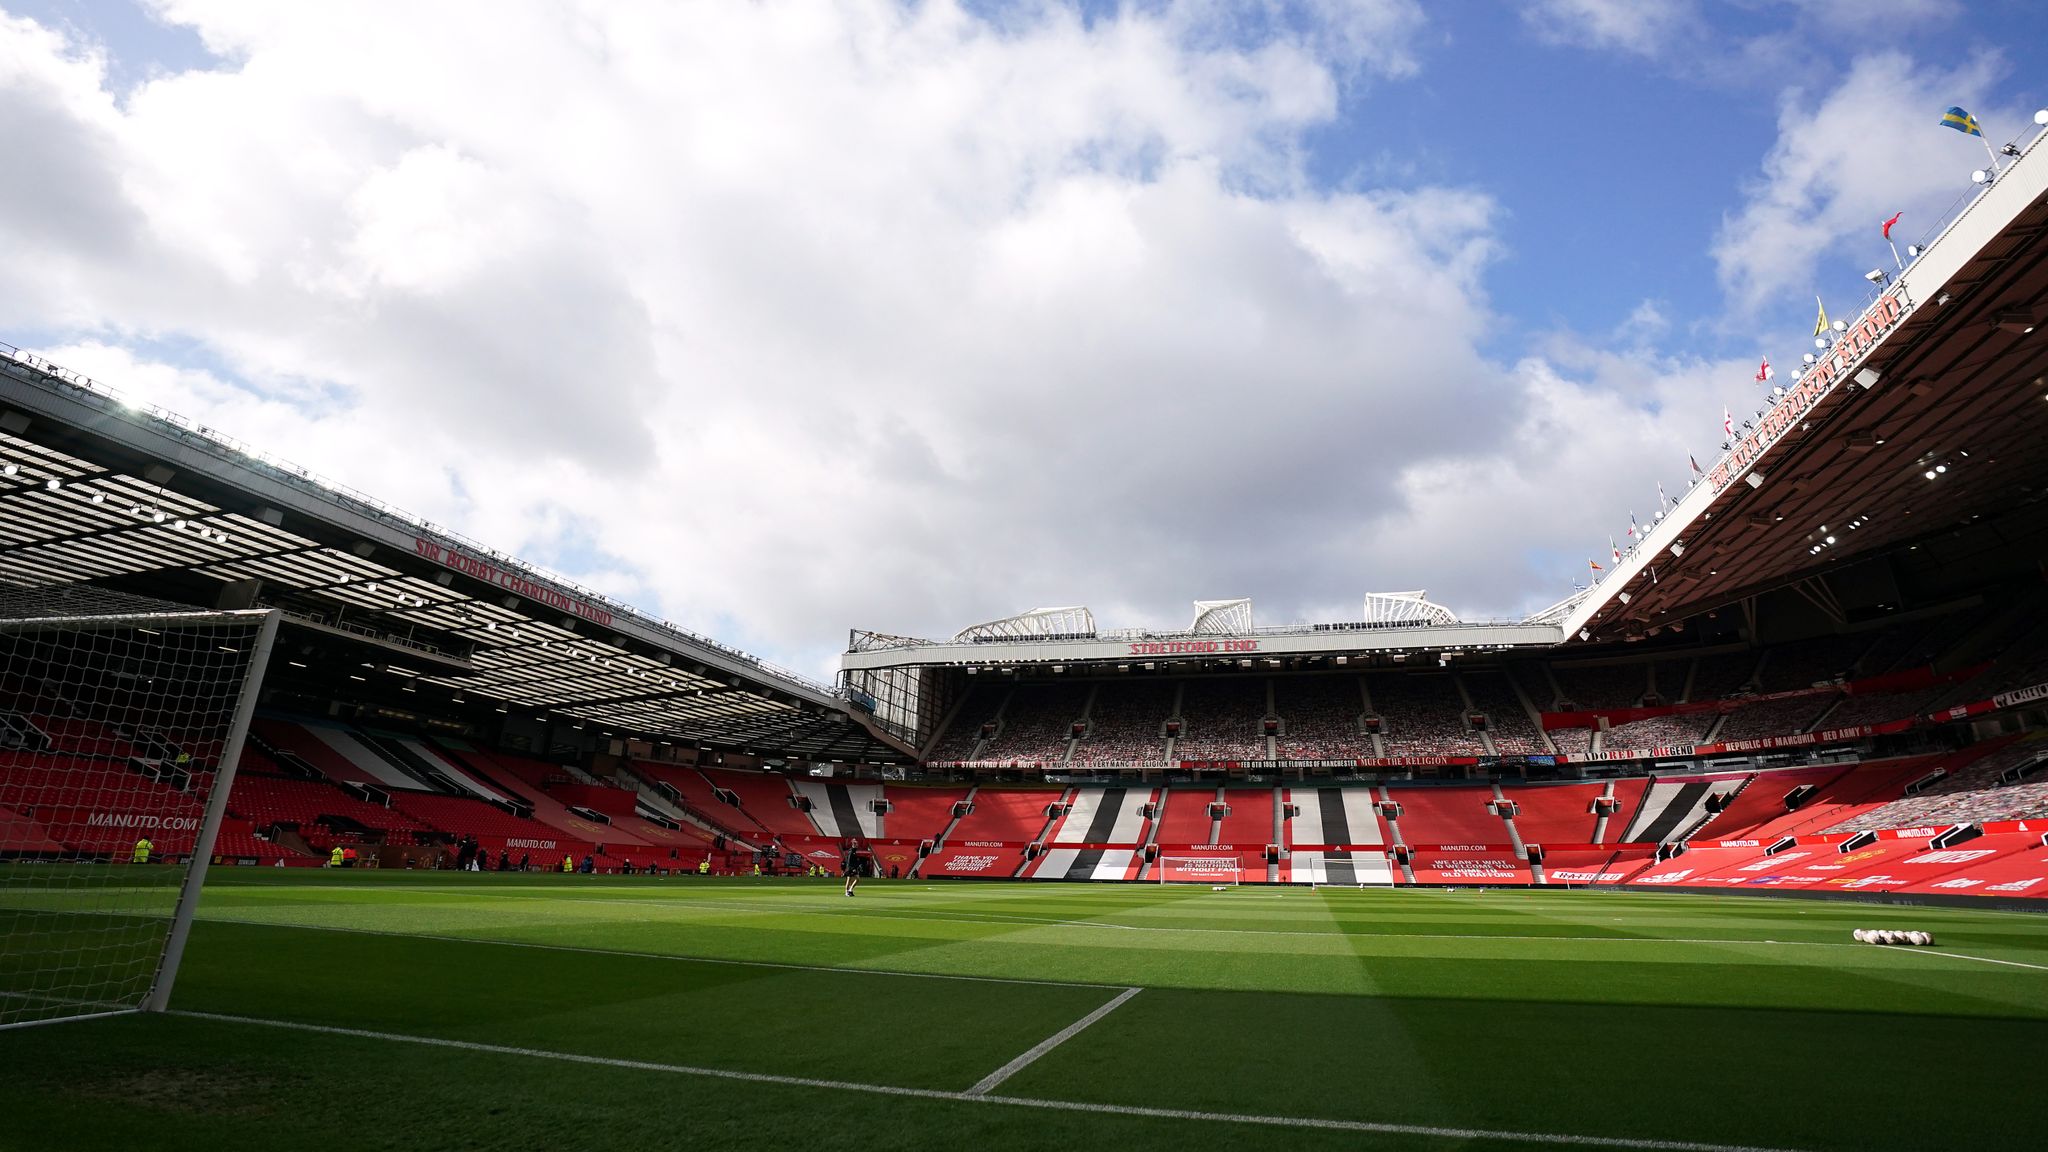 Man United’s Game With Brentford Postponed Over COVID-19